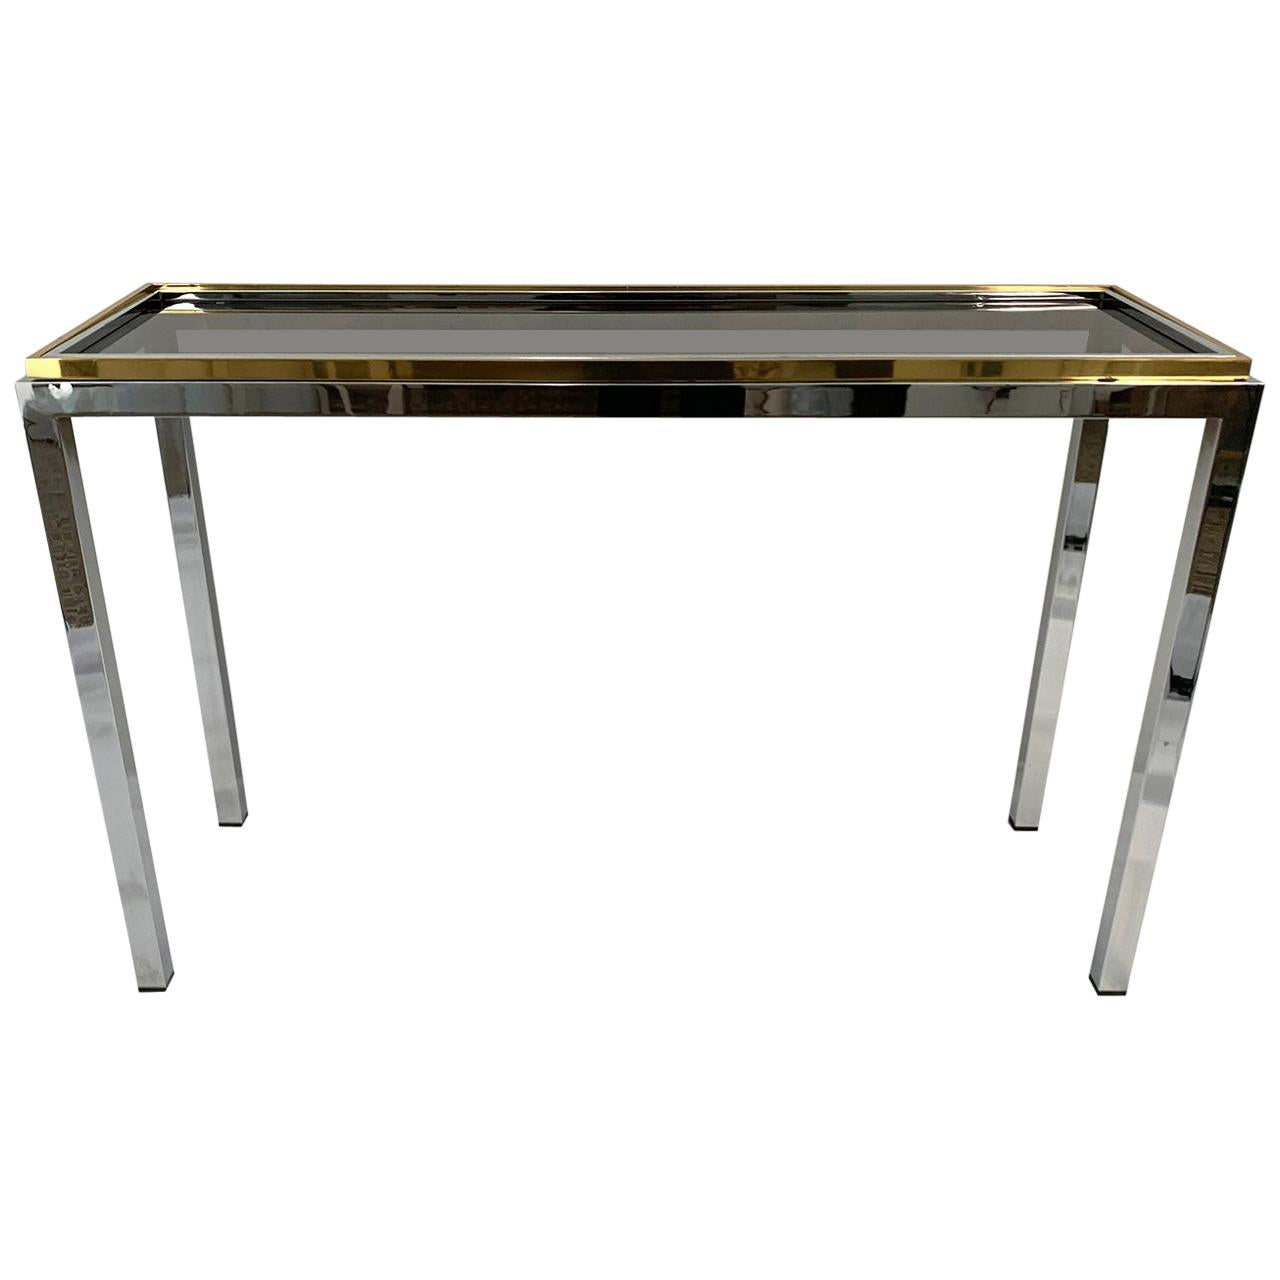 Chrome and Brass Console by Willy Rizzo, Linea Flaminia